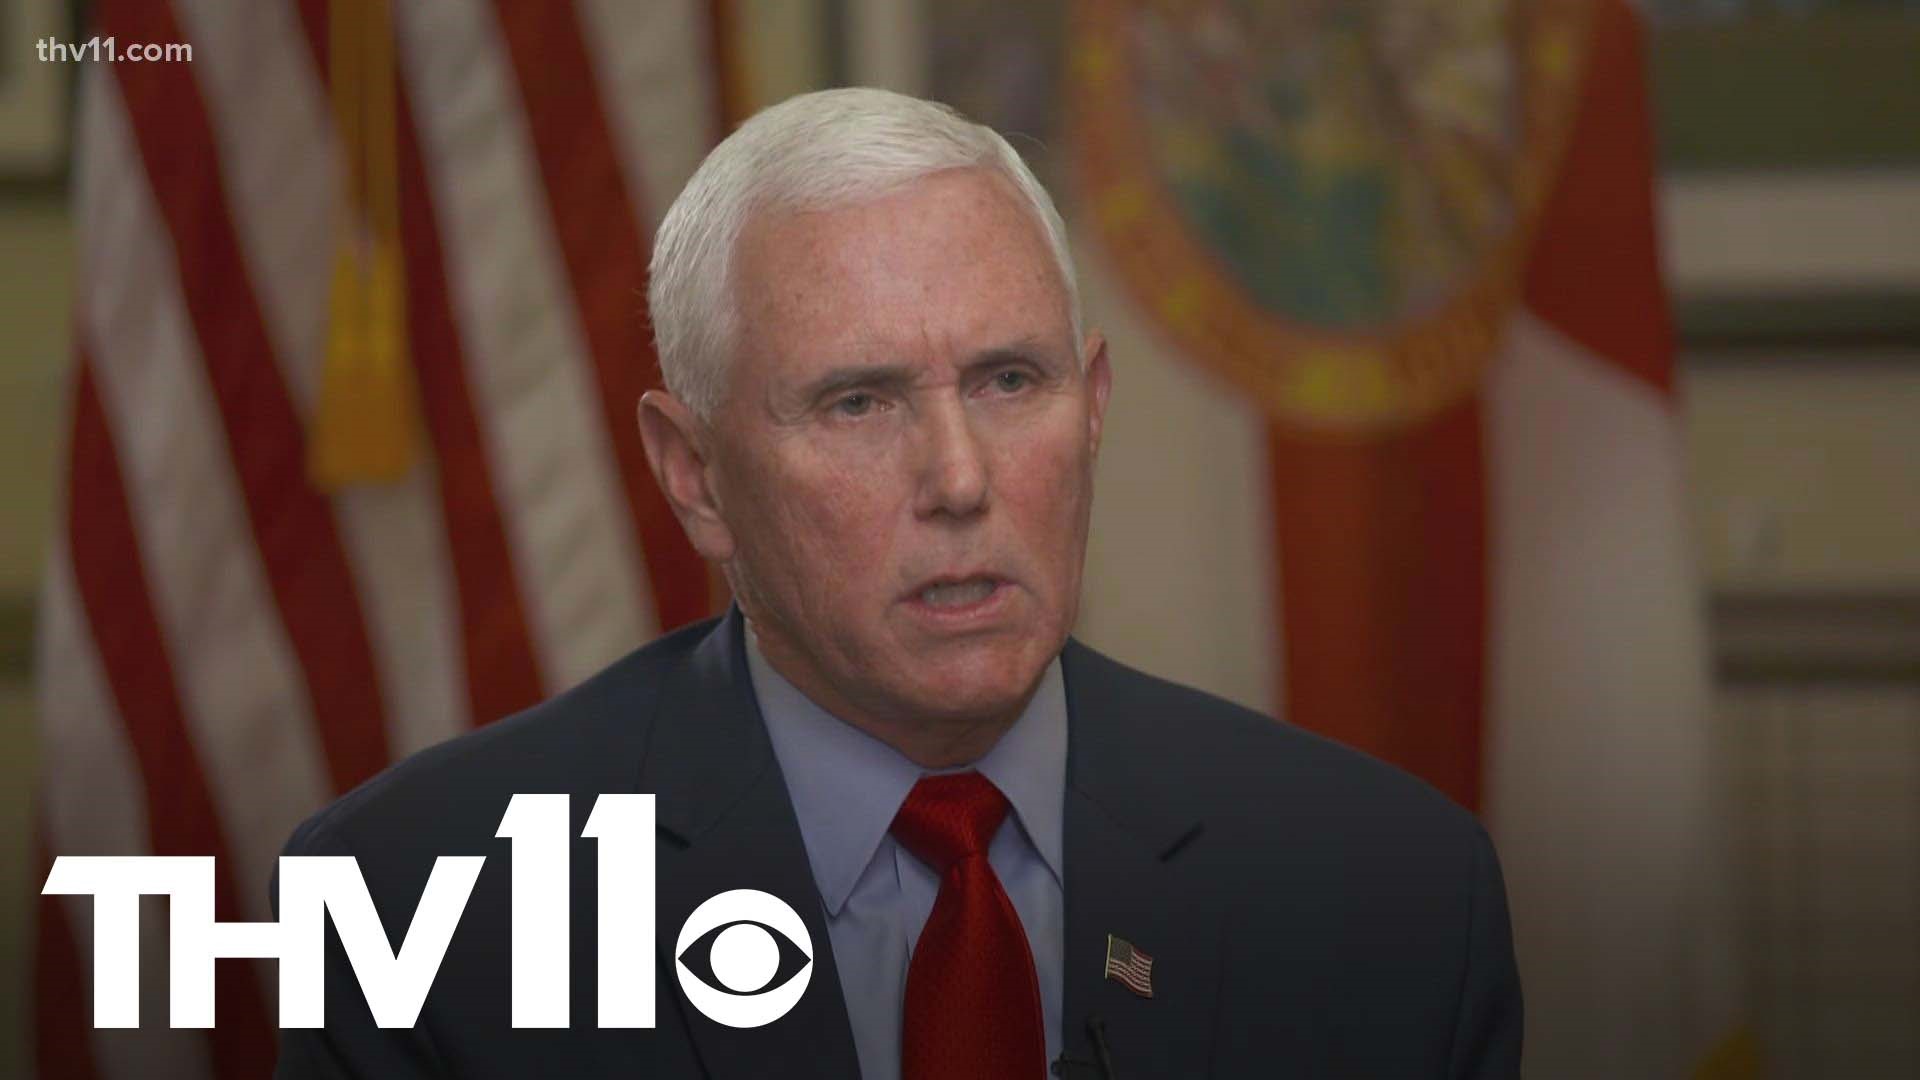 The former vice president was asked last year if he had retained any classified information upon leaving office and said, “No, not to my knowledge.”